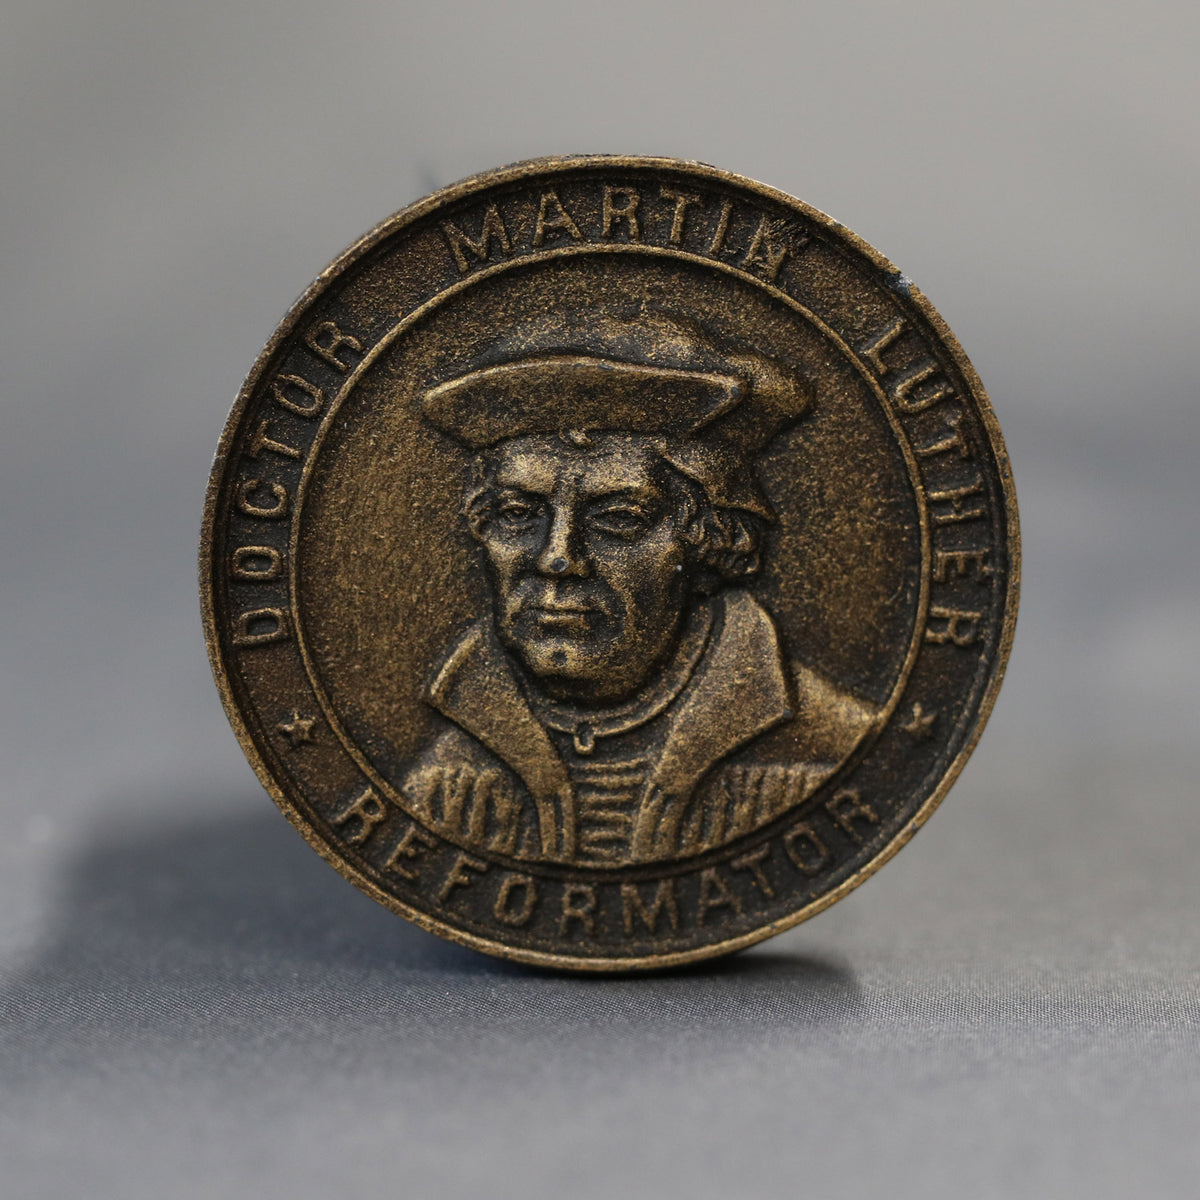 Dr. Martin Luther Commemorative Coin